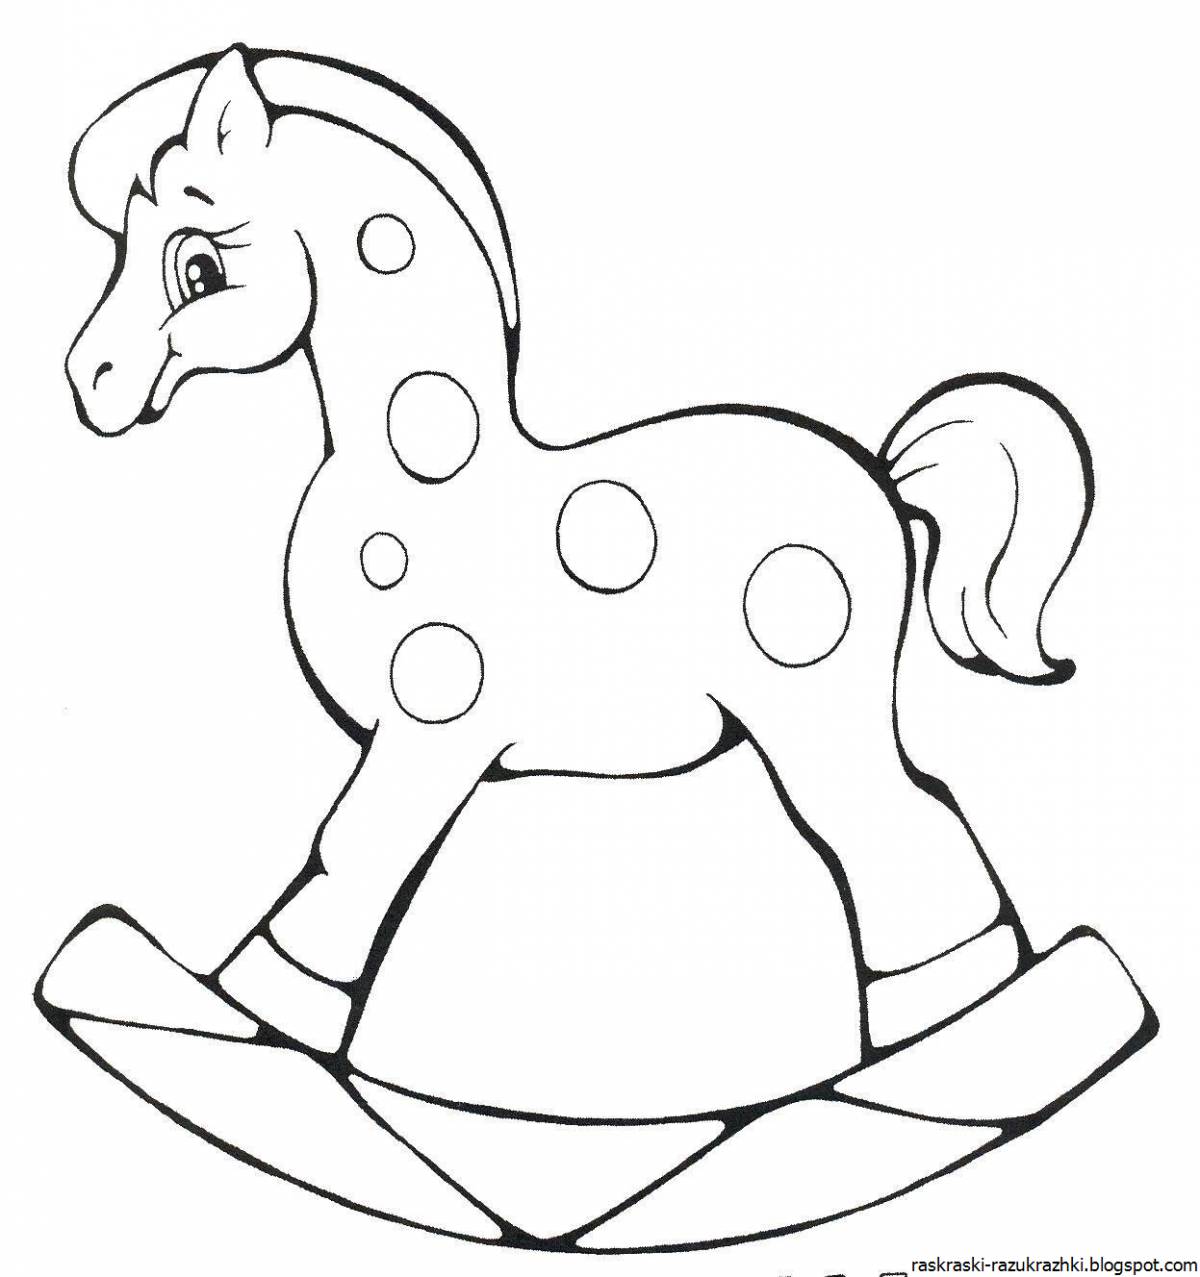 Exquisite horse coloring book for 3-4 year olds